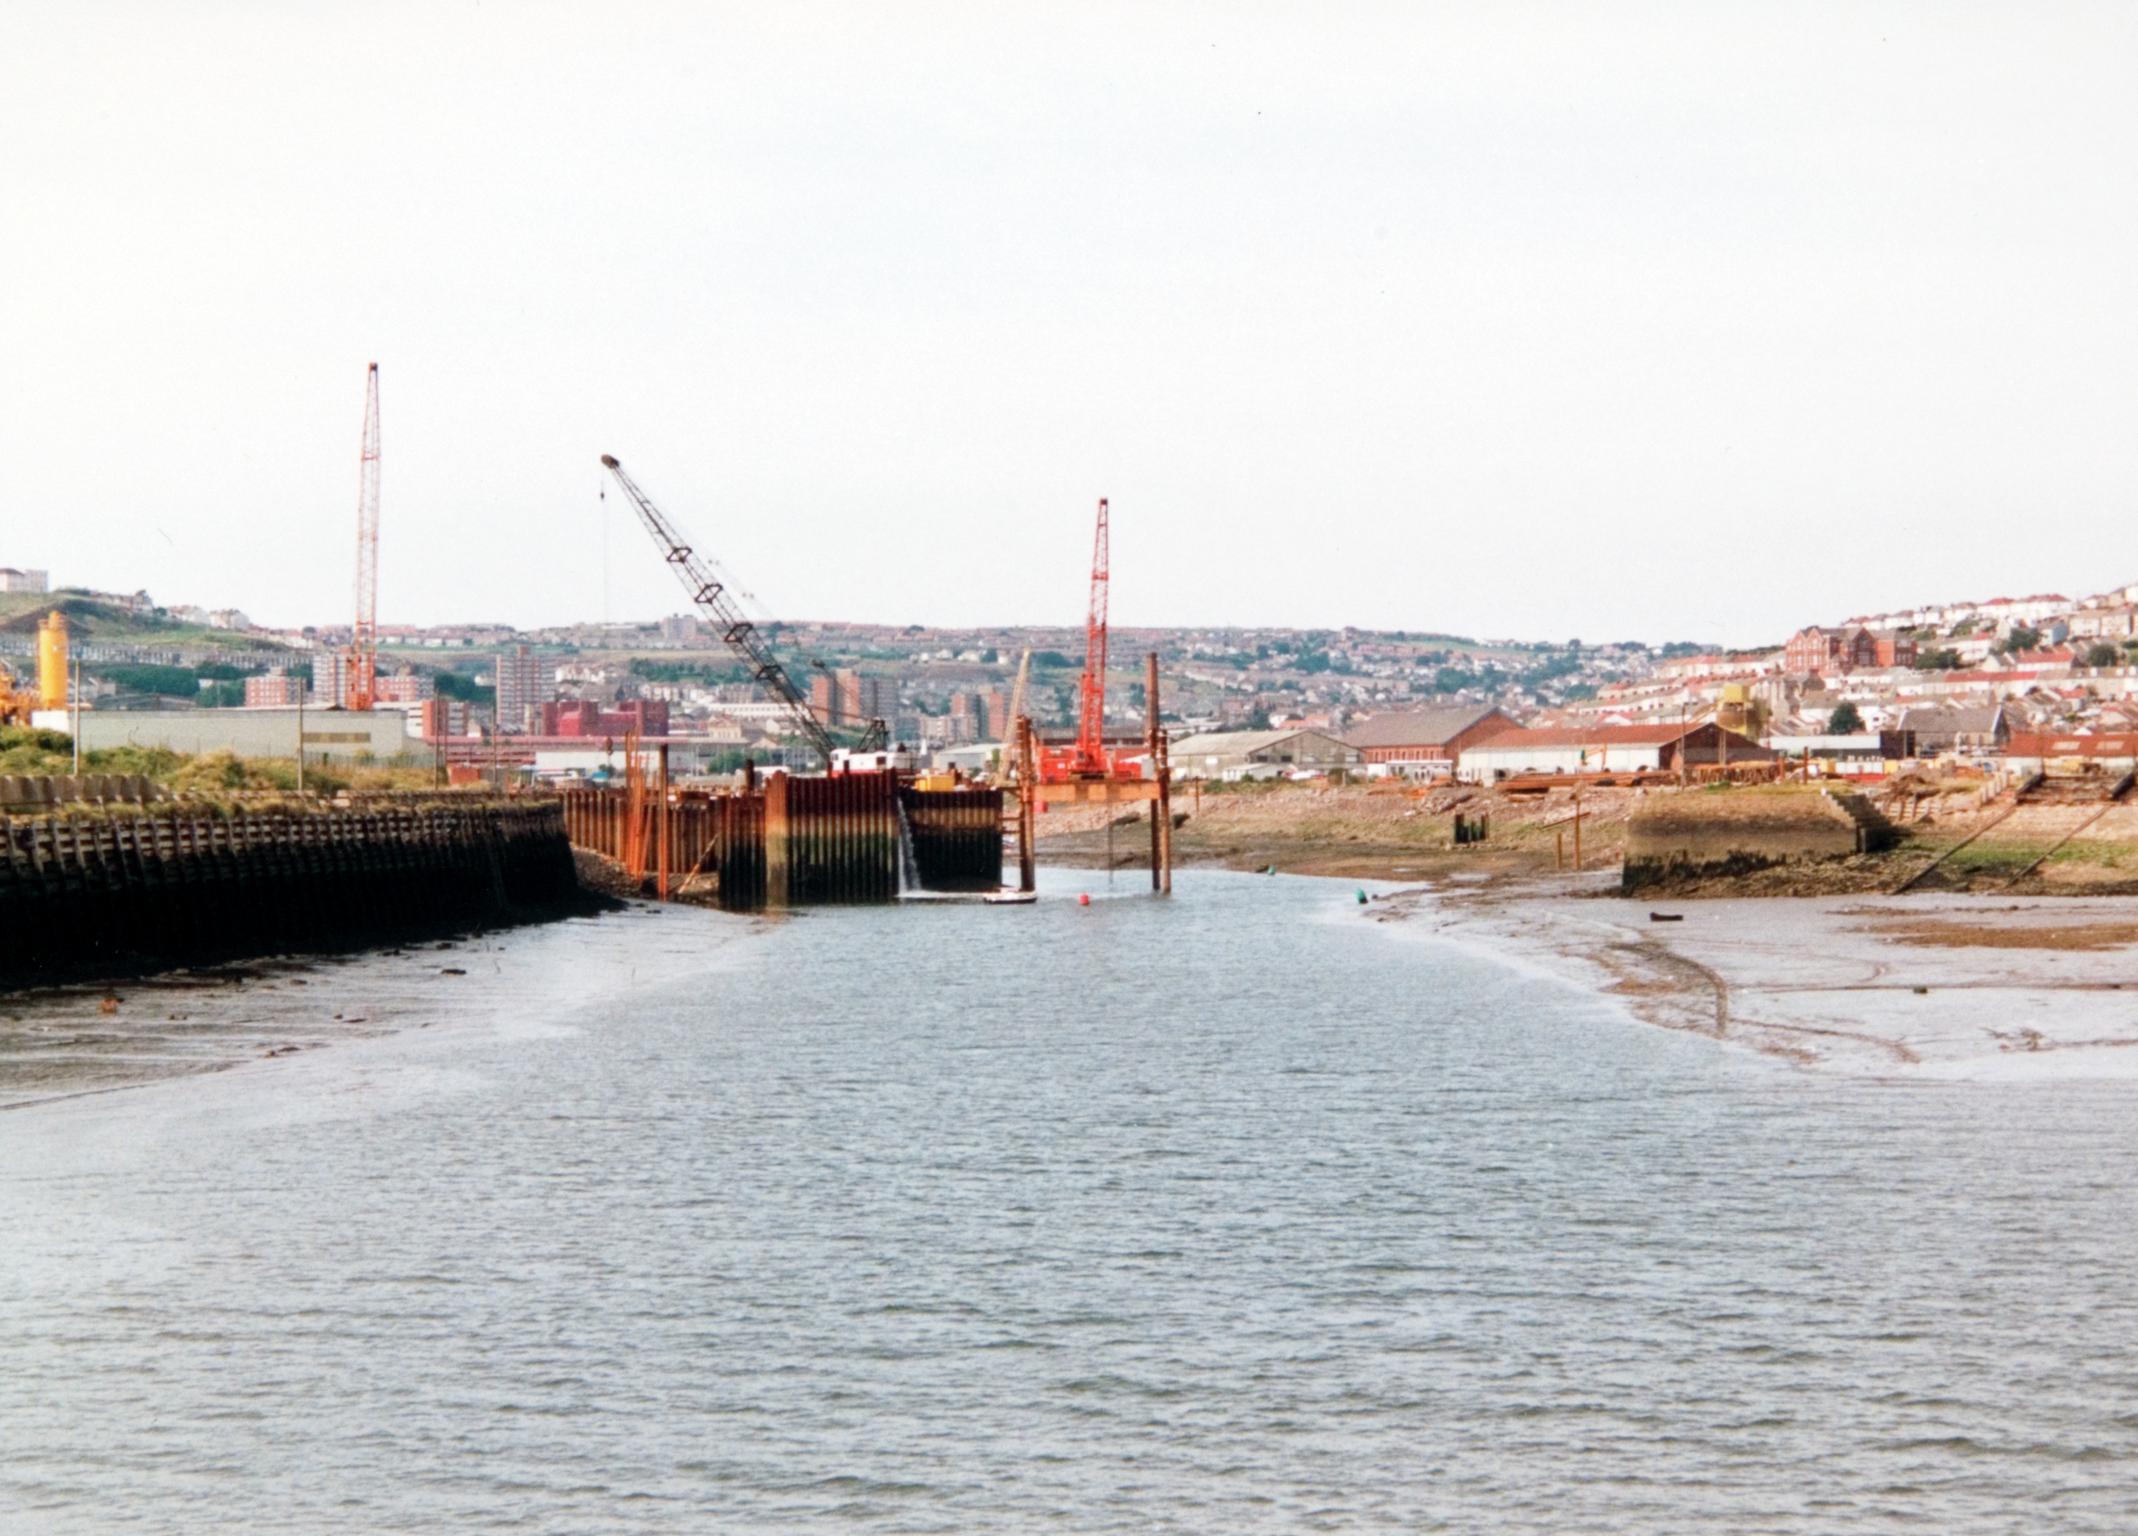 Construction of Tawe barrage, photograph